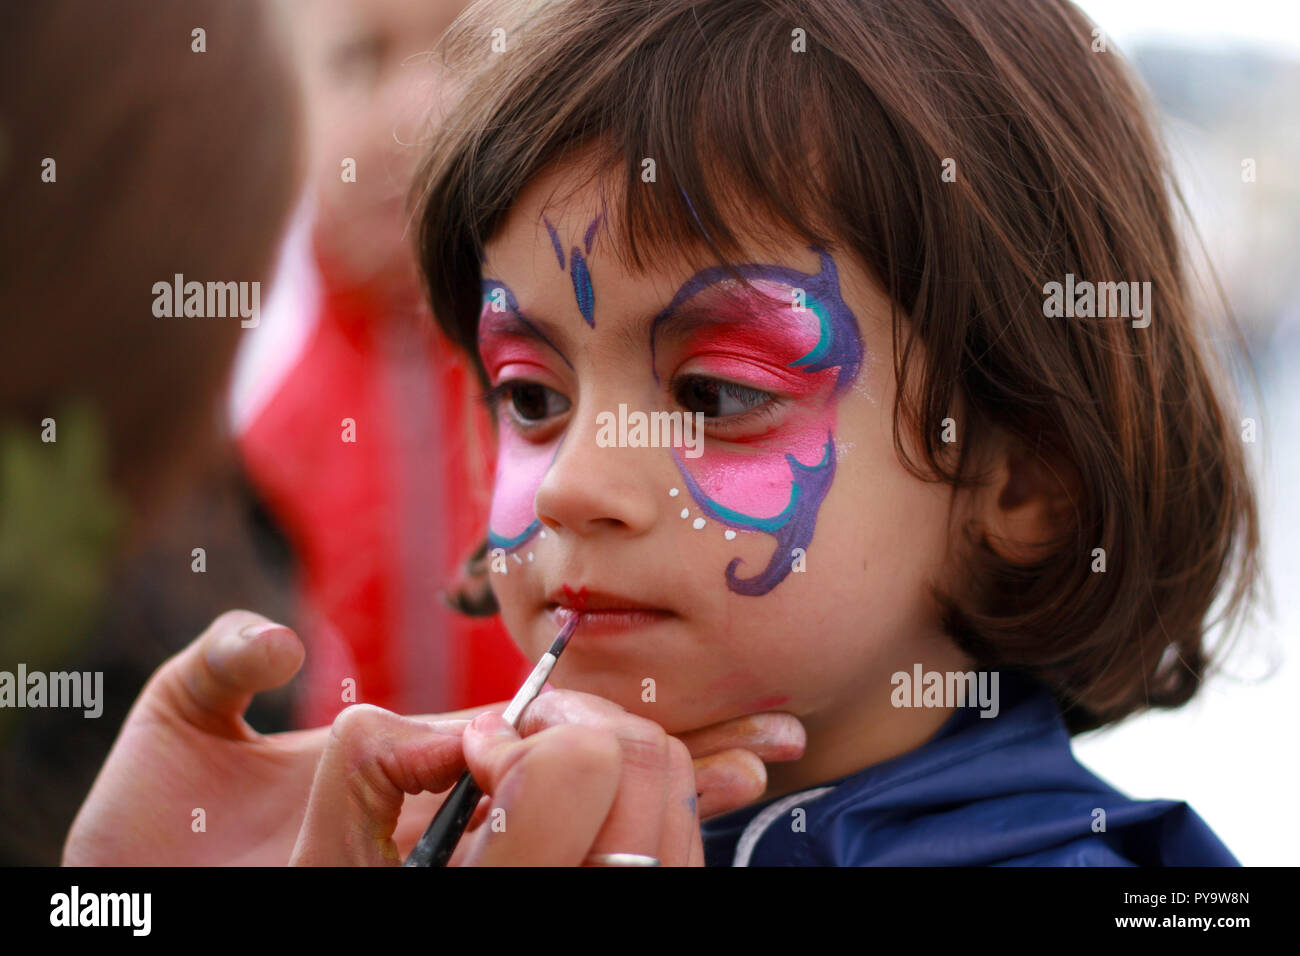 Girl having her face painted as a butterfly Stock Photo